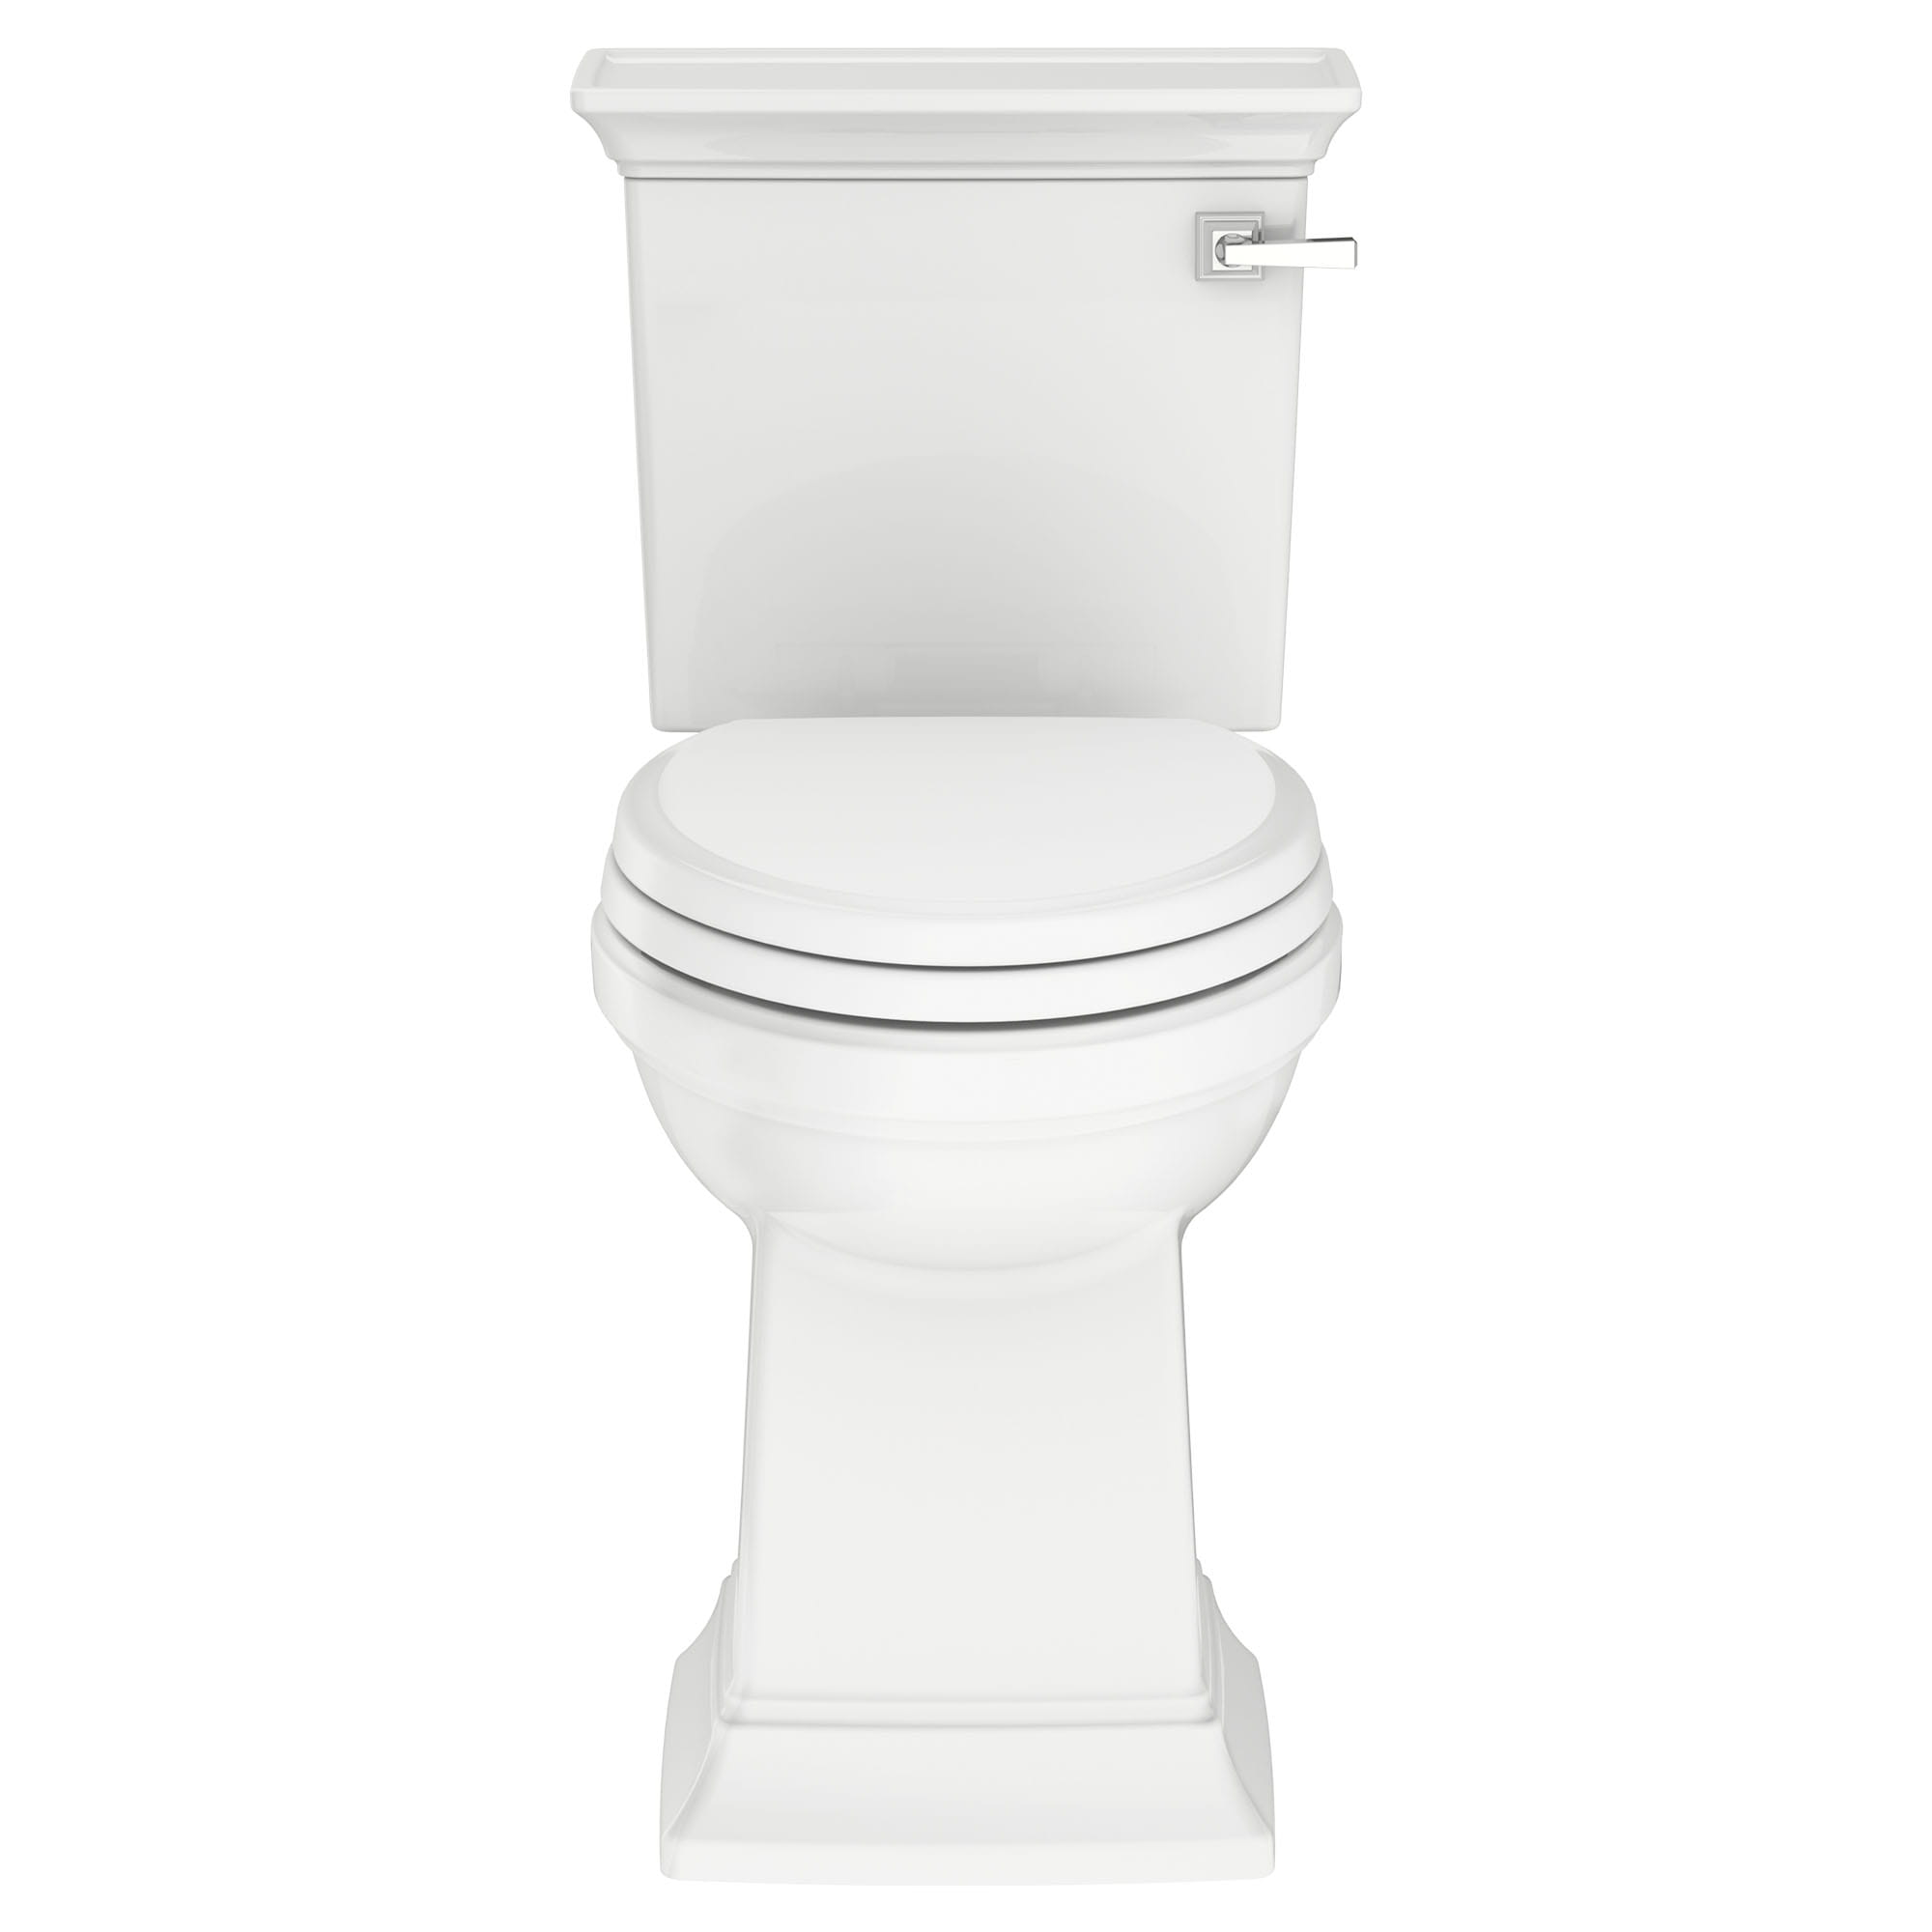 Town Square S Two Piece 128 gpf 48 Lpf Chair Height Right Hand Trip Lever Elongated Toilet Less Seat WHITE